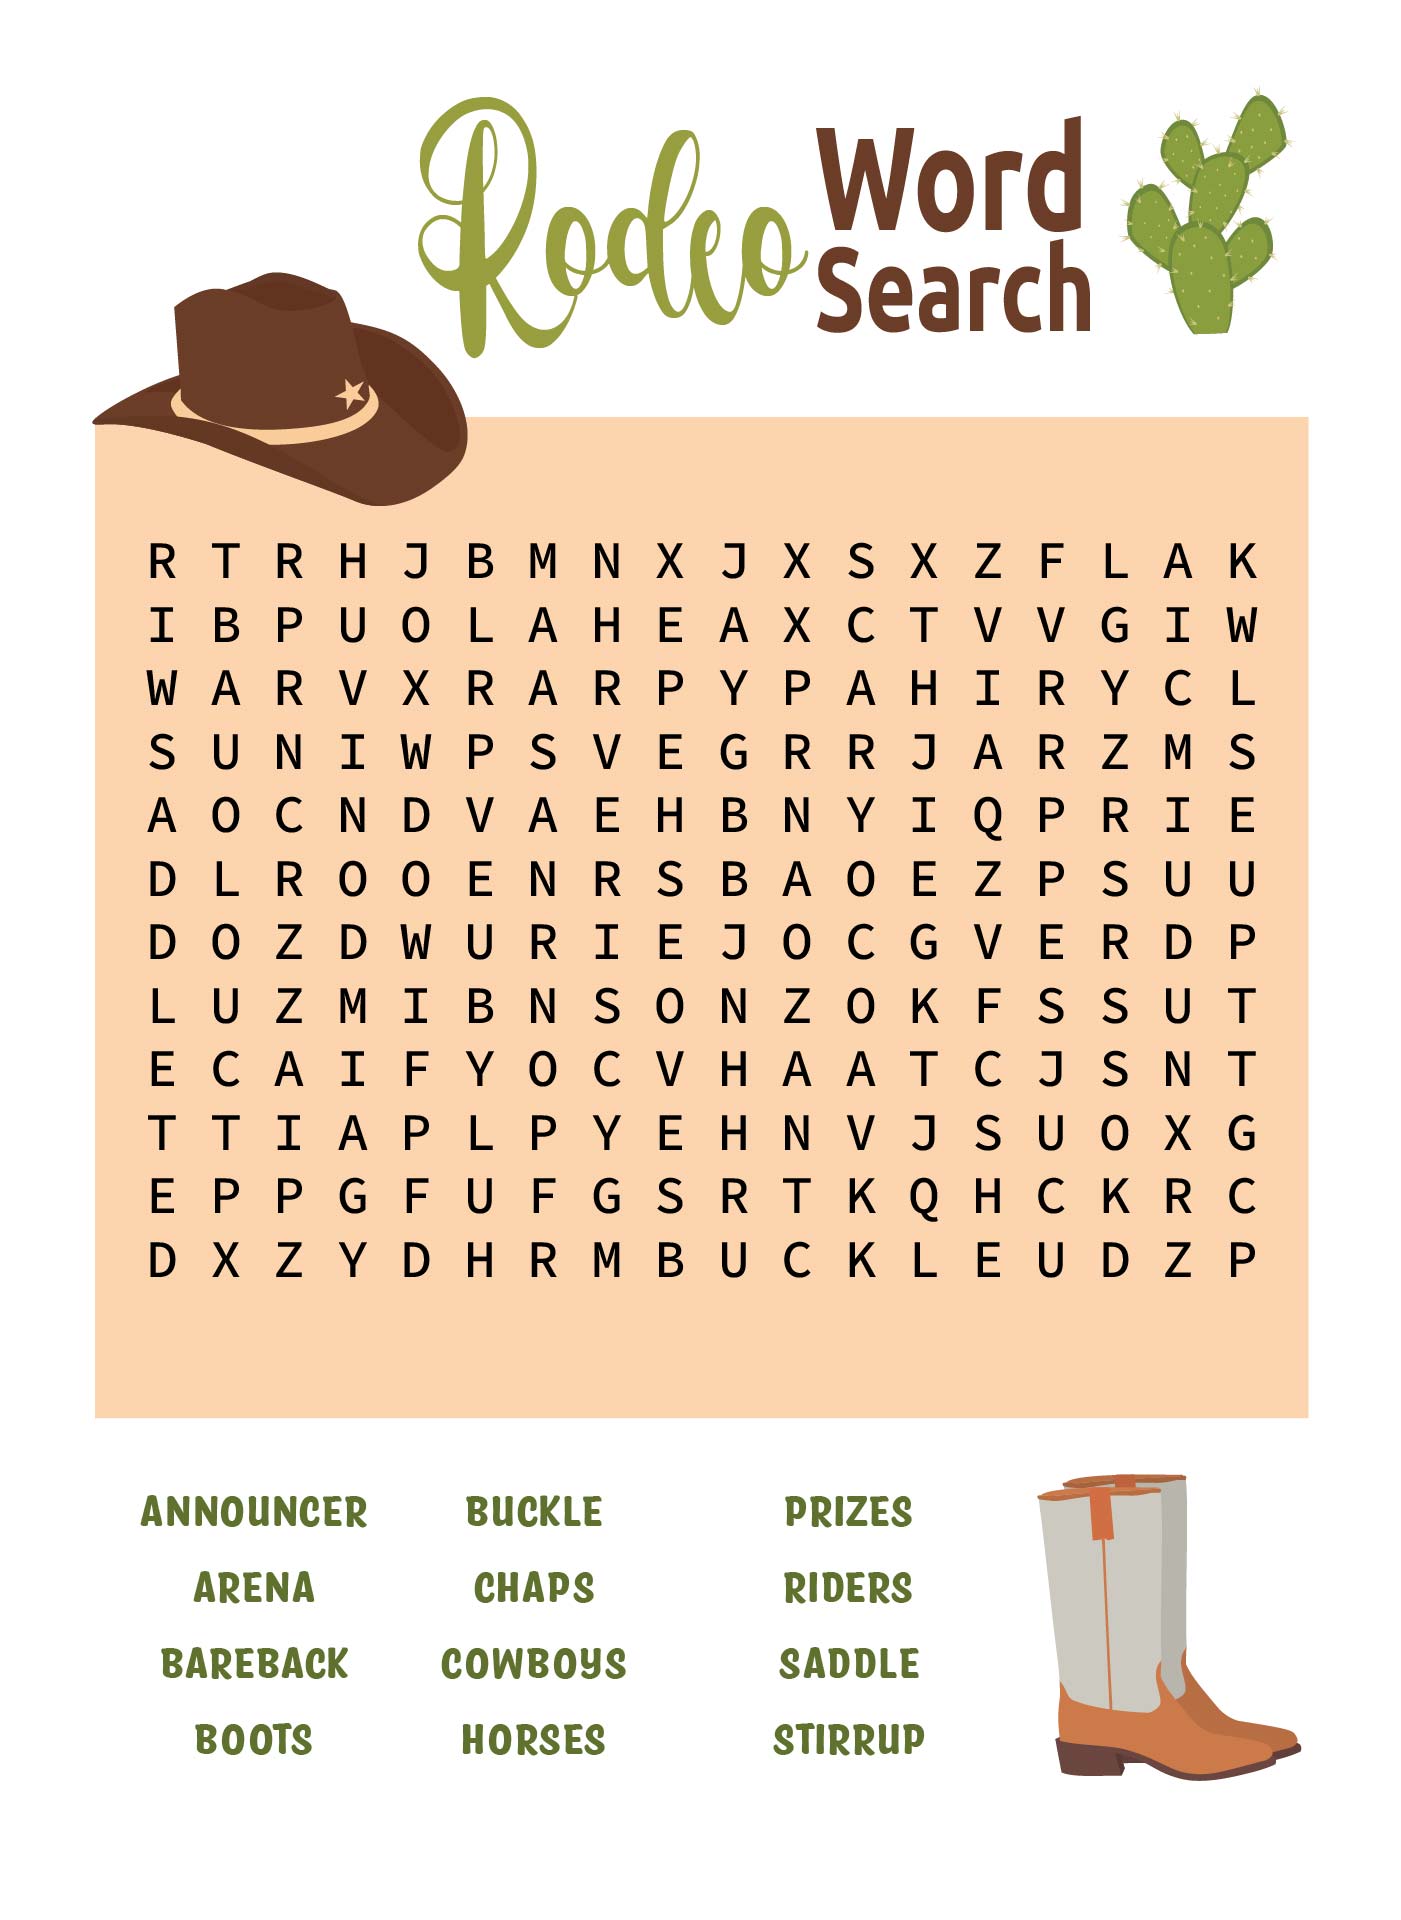 Rodeo Word Search Puzzle Printable